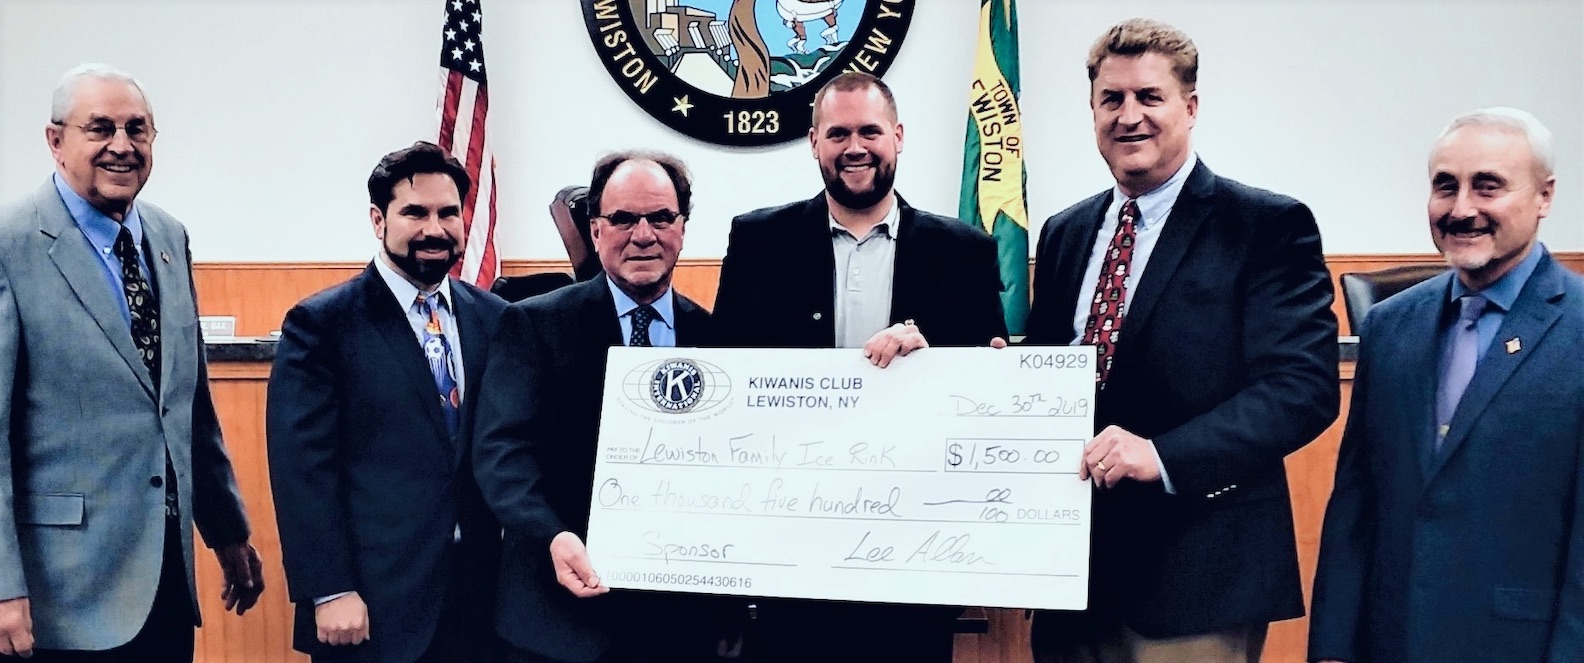 Kiwanis Club of Lewiston President Lee Allan, center right, is shown with Town of Lewiston Board members (from left) Bill Geiben, Al Bax, Rob Morreale, Supervisor Steve Broderick and John Jacoby. (Submitted)